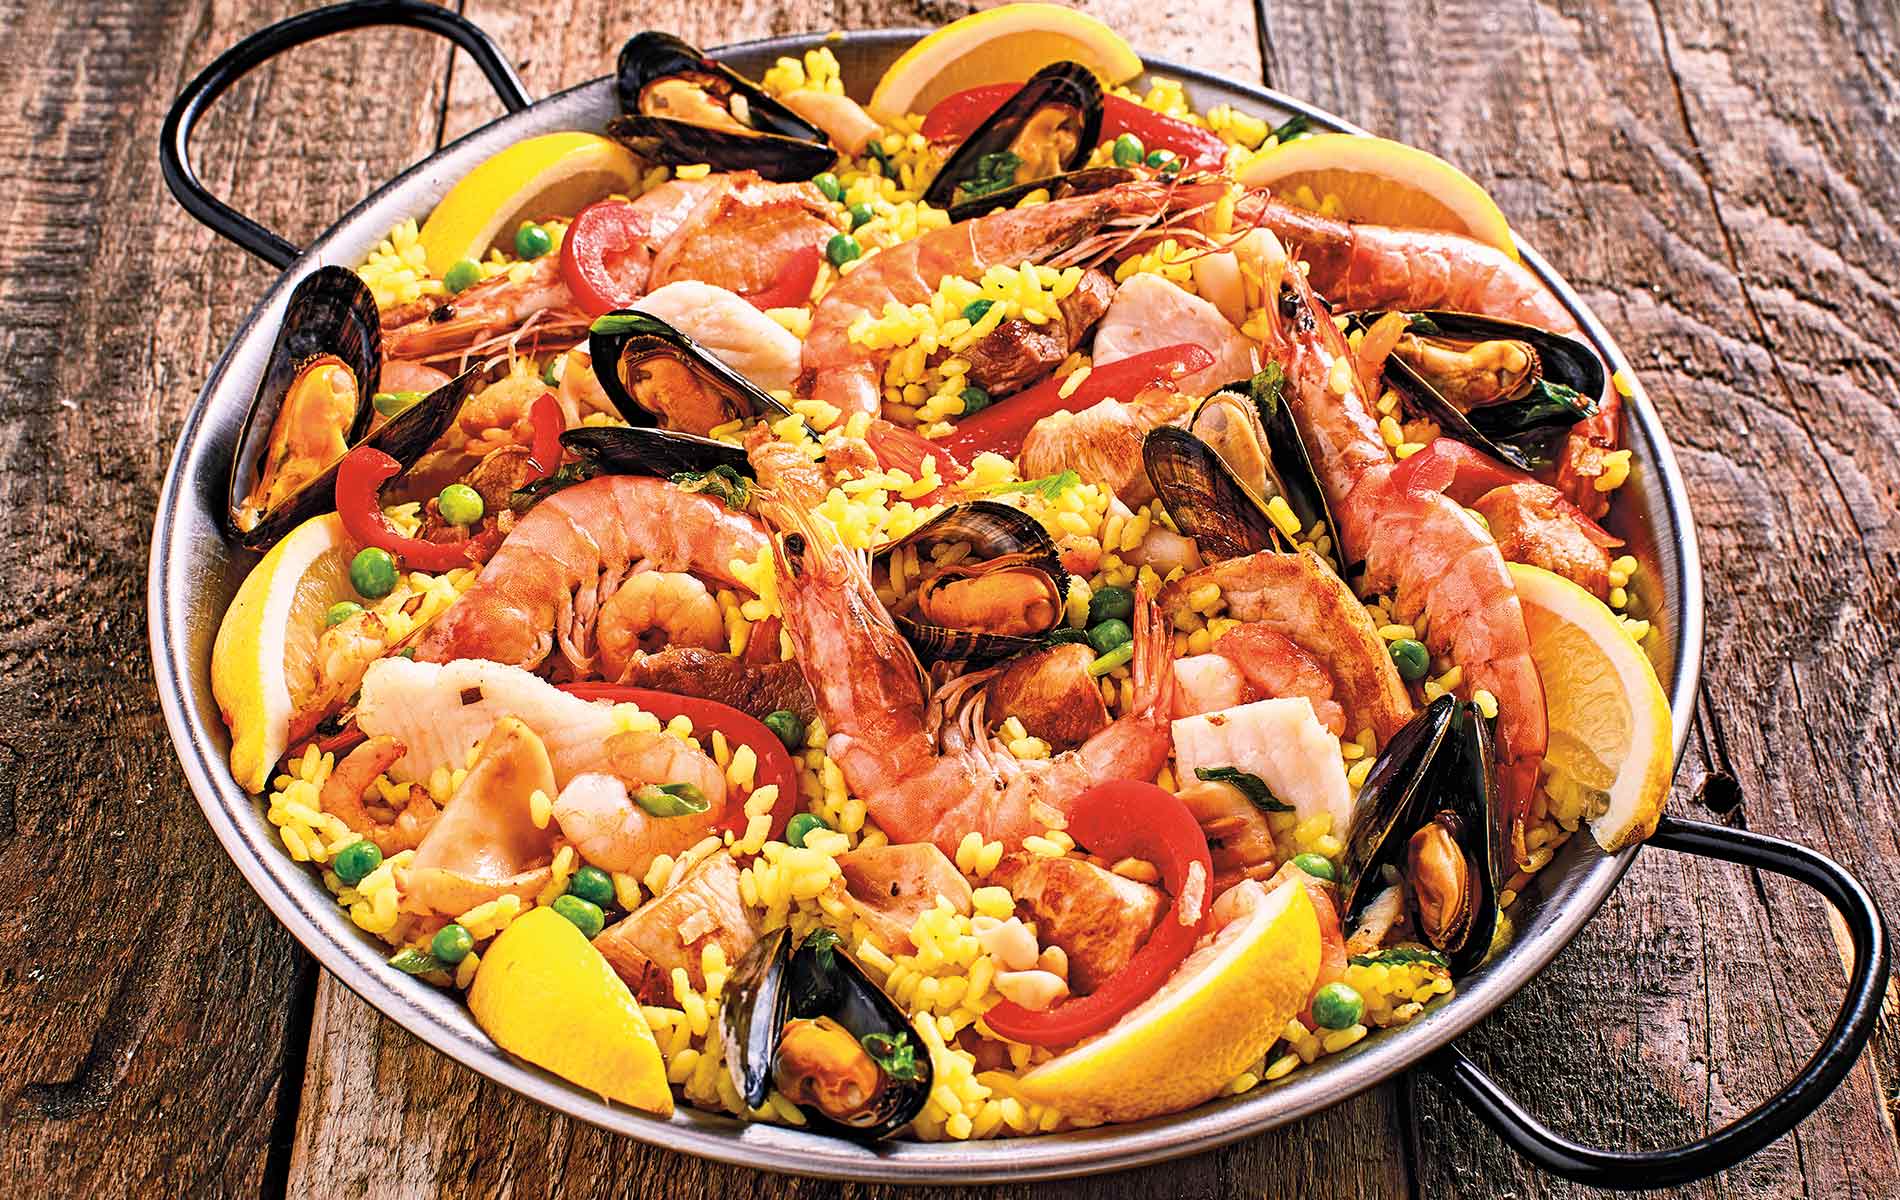 Colleen Sachs homemade family recipe for Seafood Paella